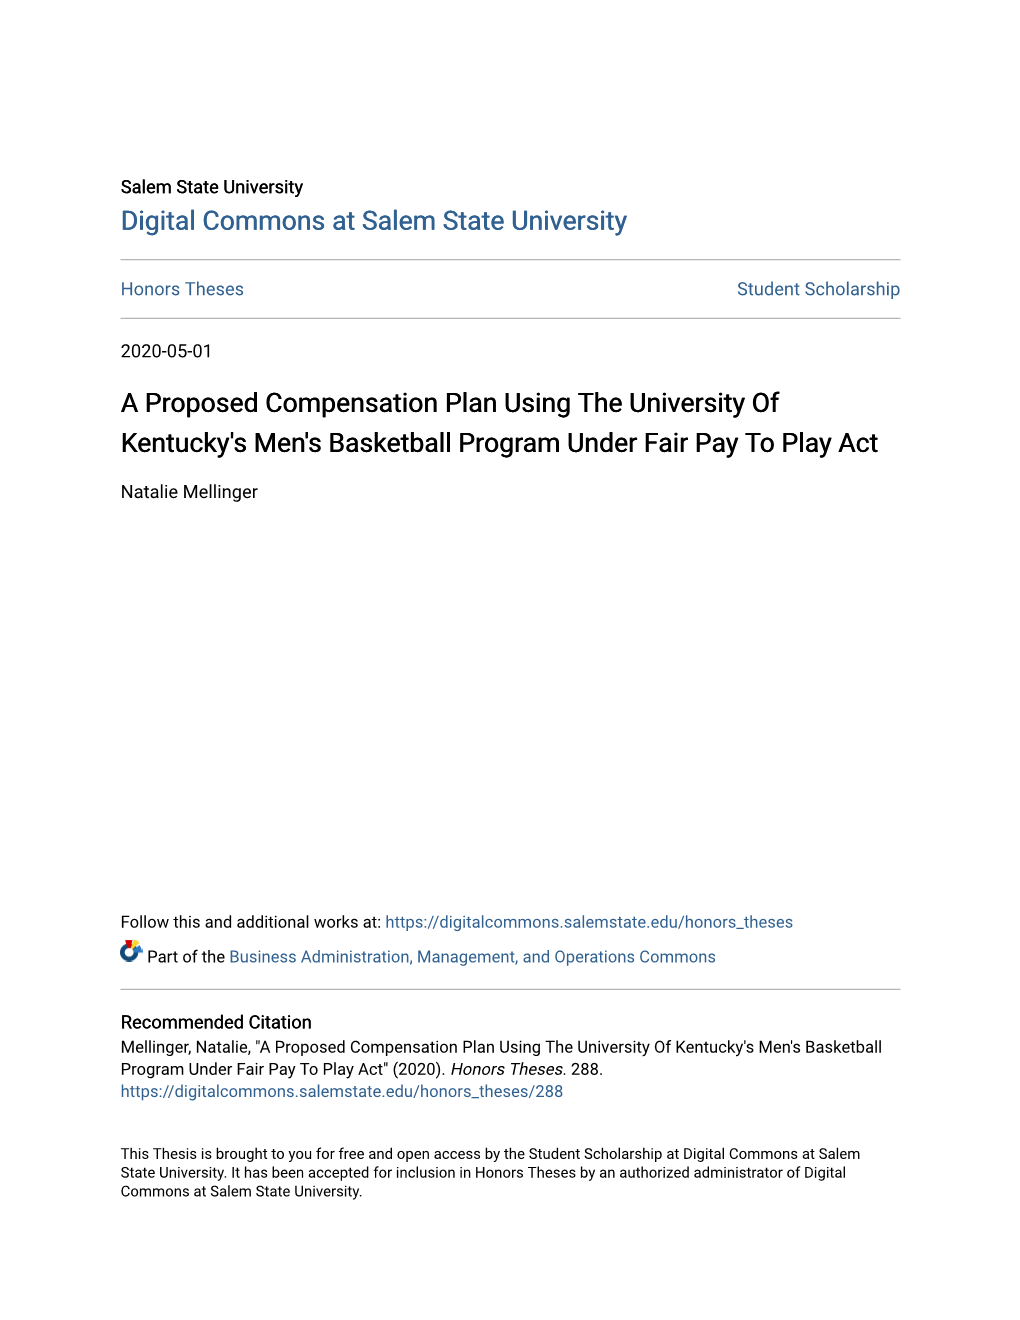 A Proposed Compensation Plan Using the University of Kentucky's Men's Basketball Program Under Fair Pay to Play Act